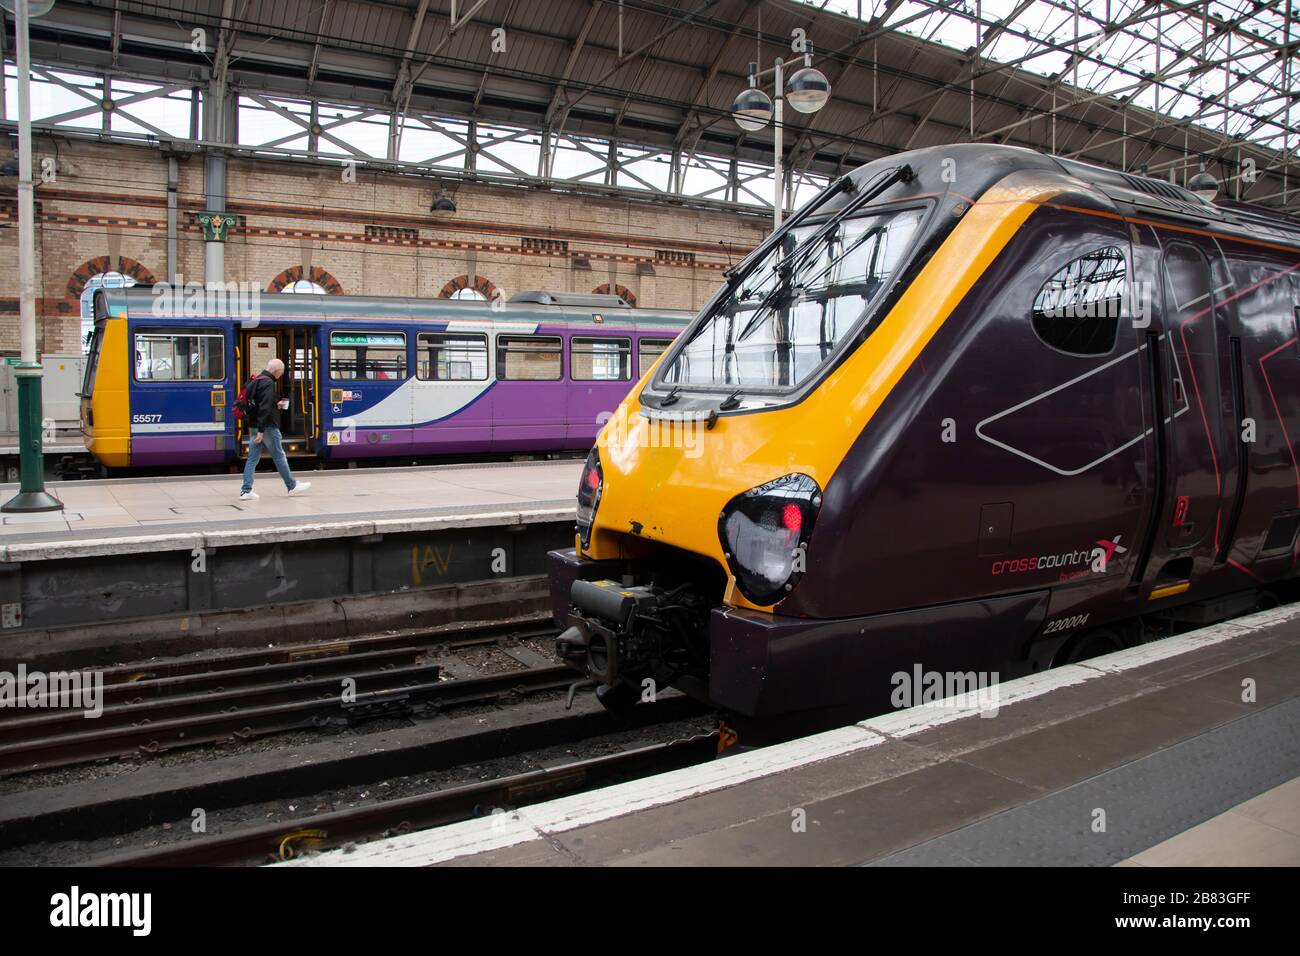 Arriva Class 220 Voyager diesel-electric high-speed multiple-unit train at Piccadilly Station, Manchester, England. Northern Trains train behind. Stock Photo